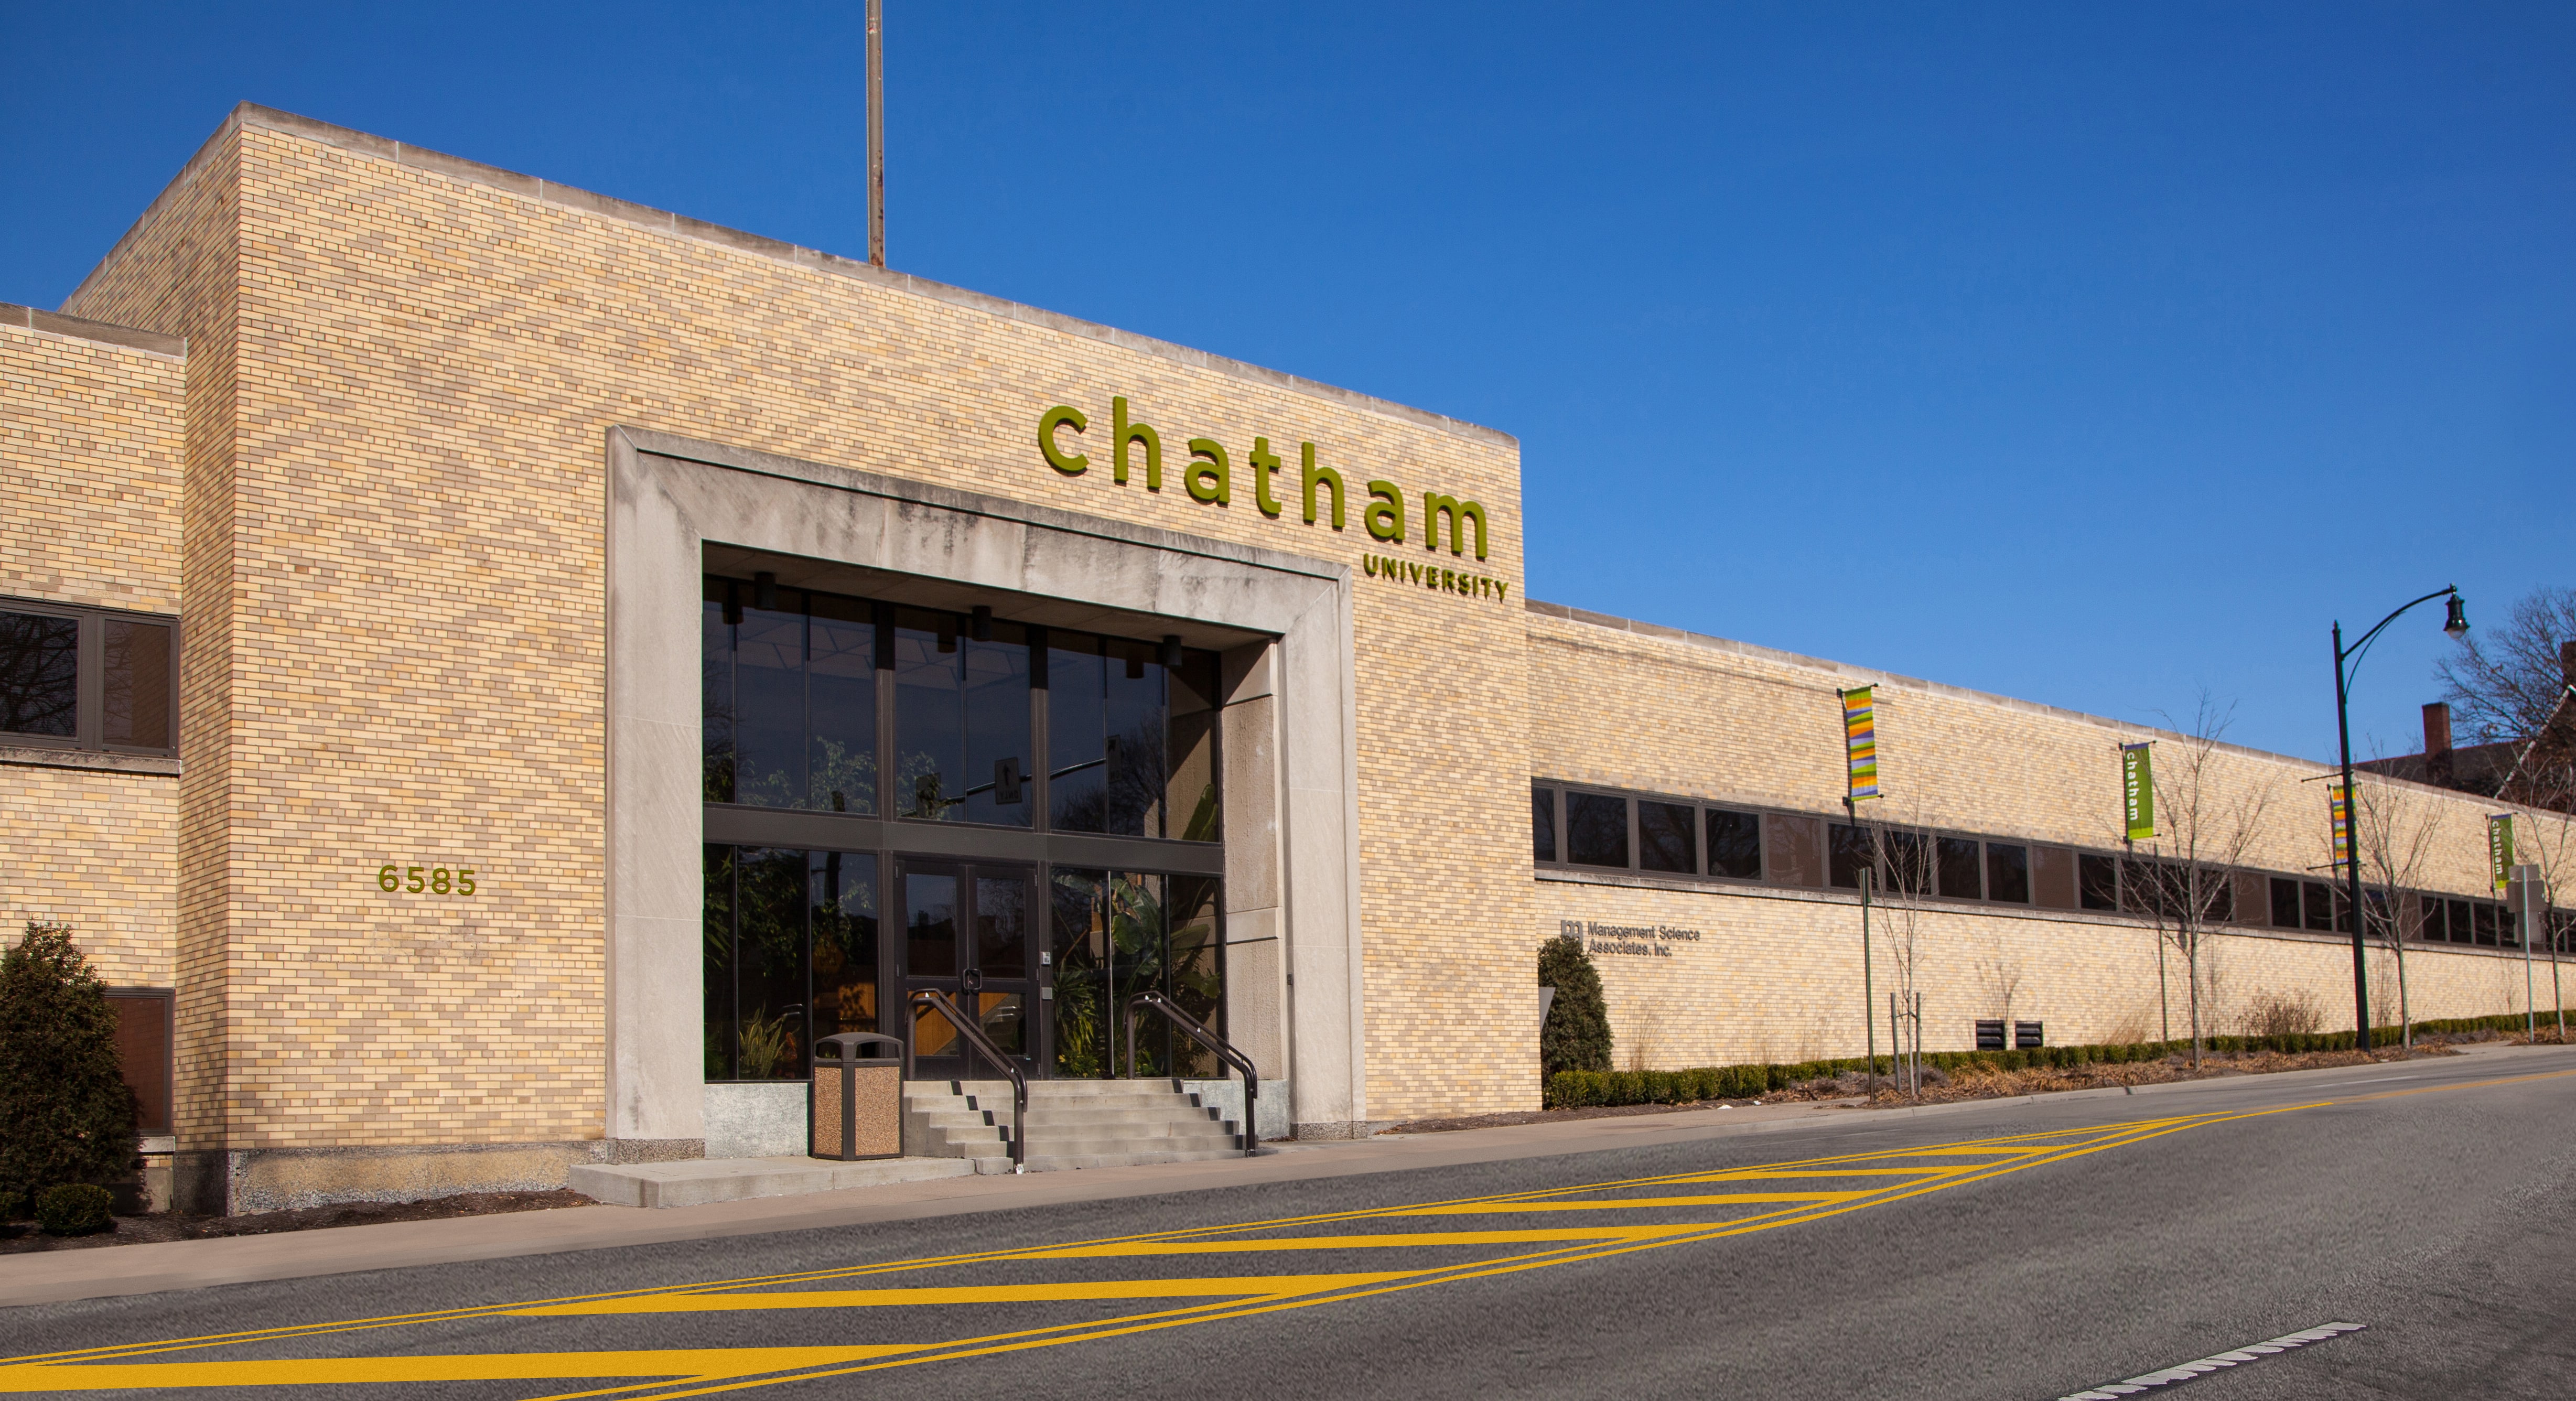 Photo of the Chatham Eastside building